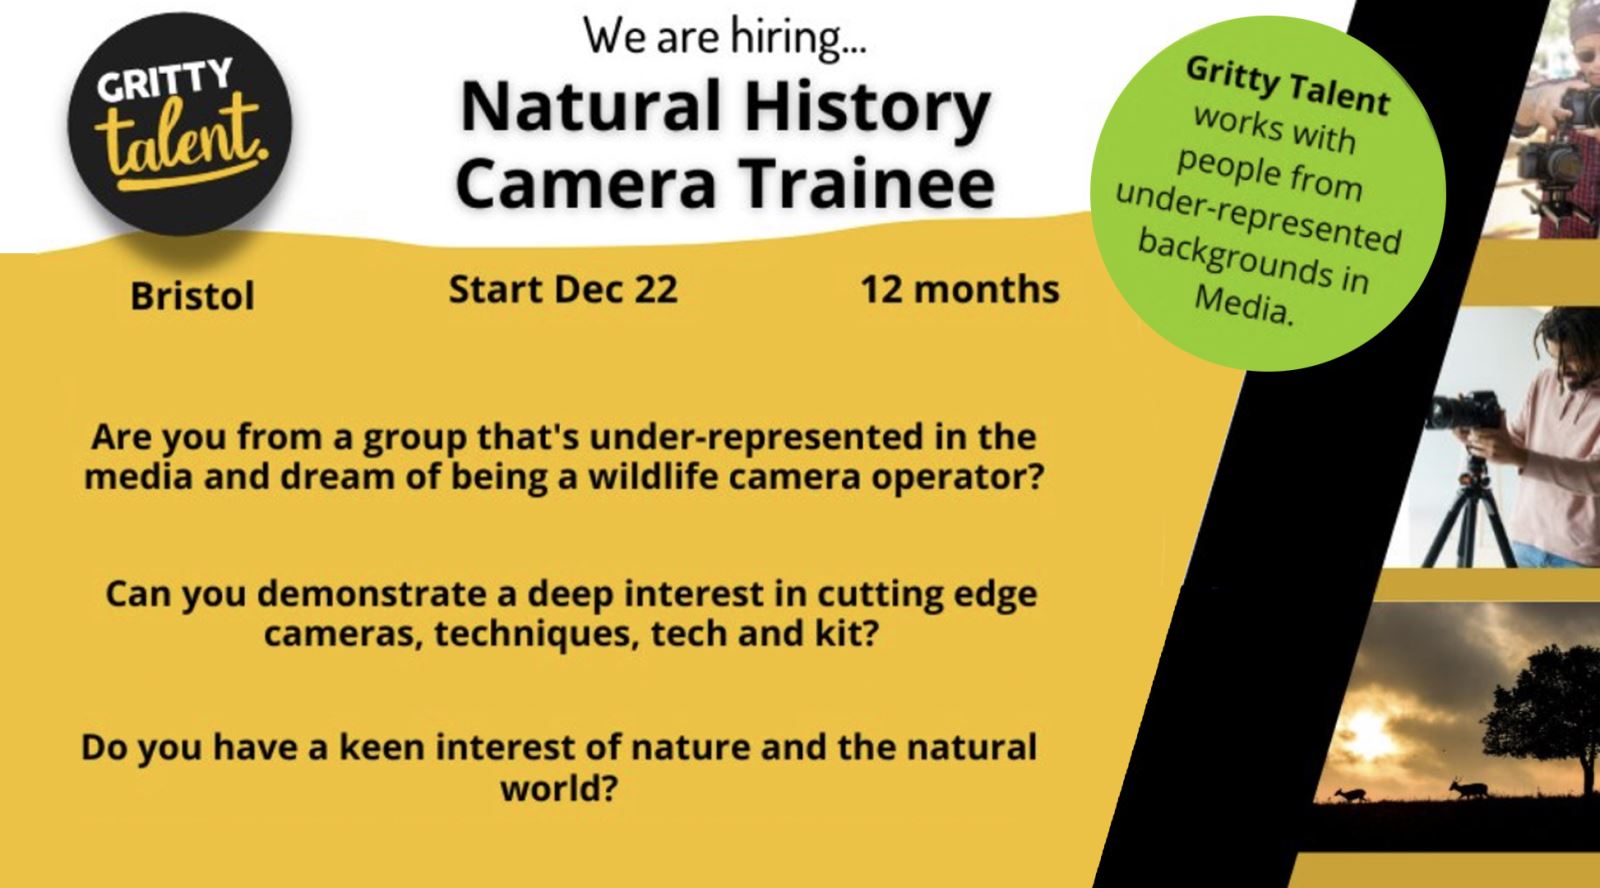 Gritty Talent - Natural History Camera Trainee